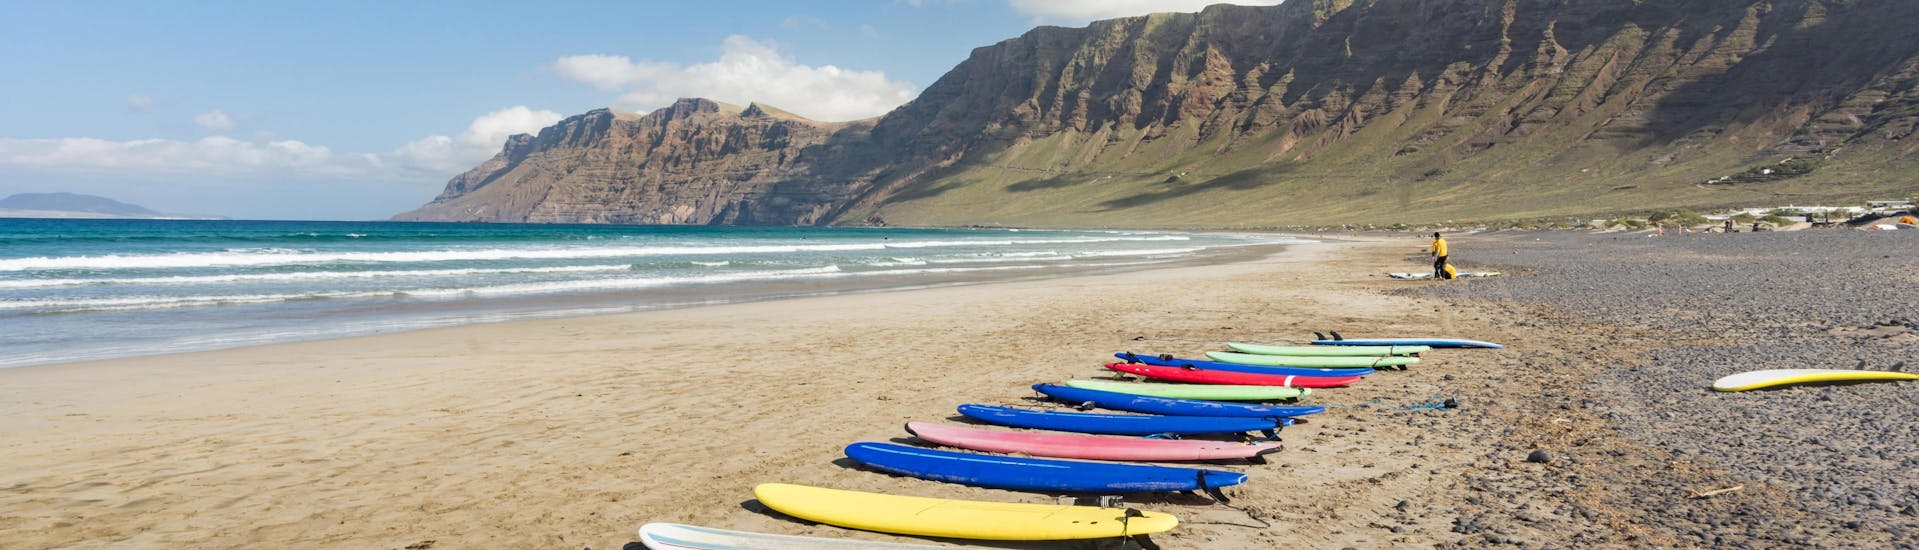 A set of surf boards is lined up on the beach for people to go surfing in Lanzarote.